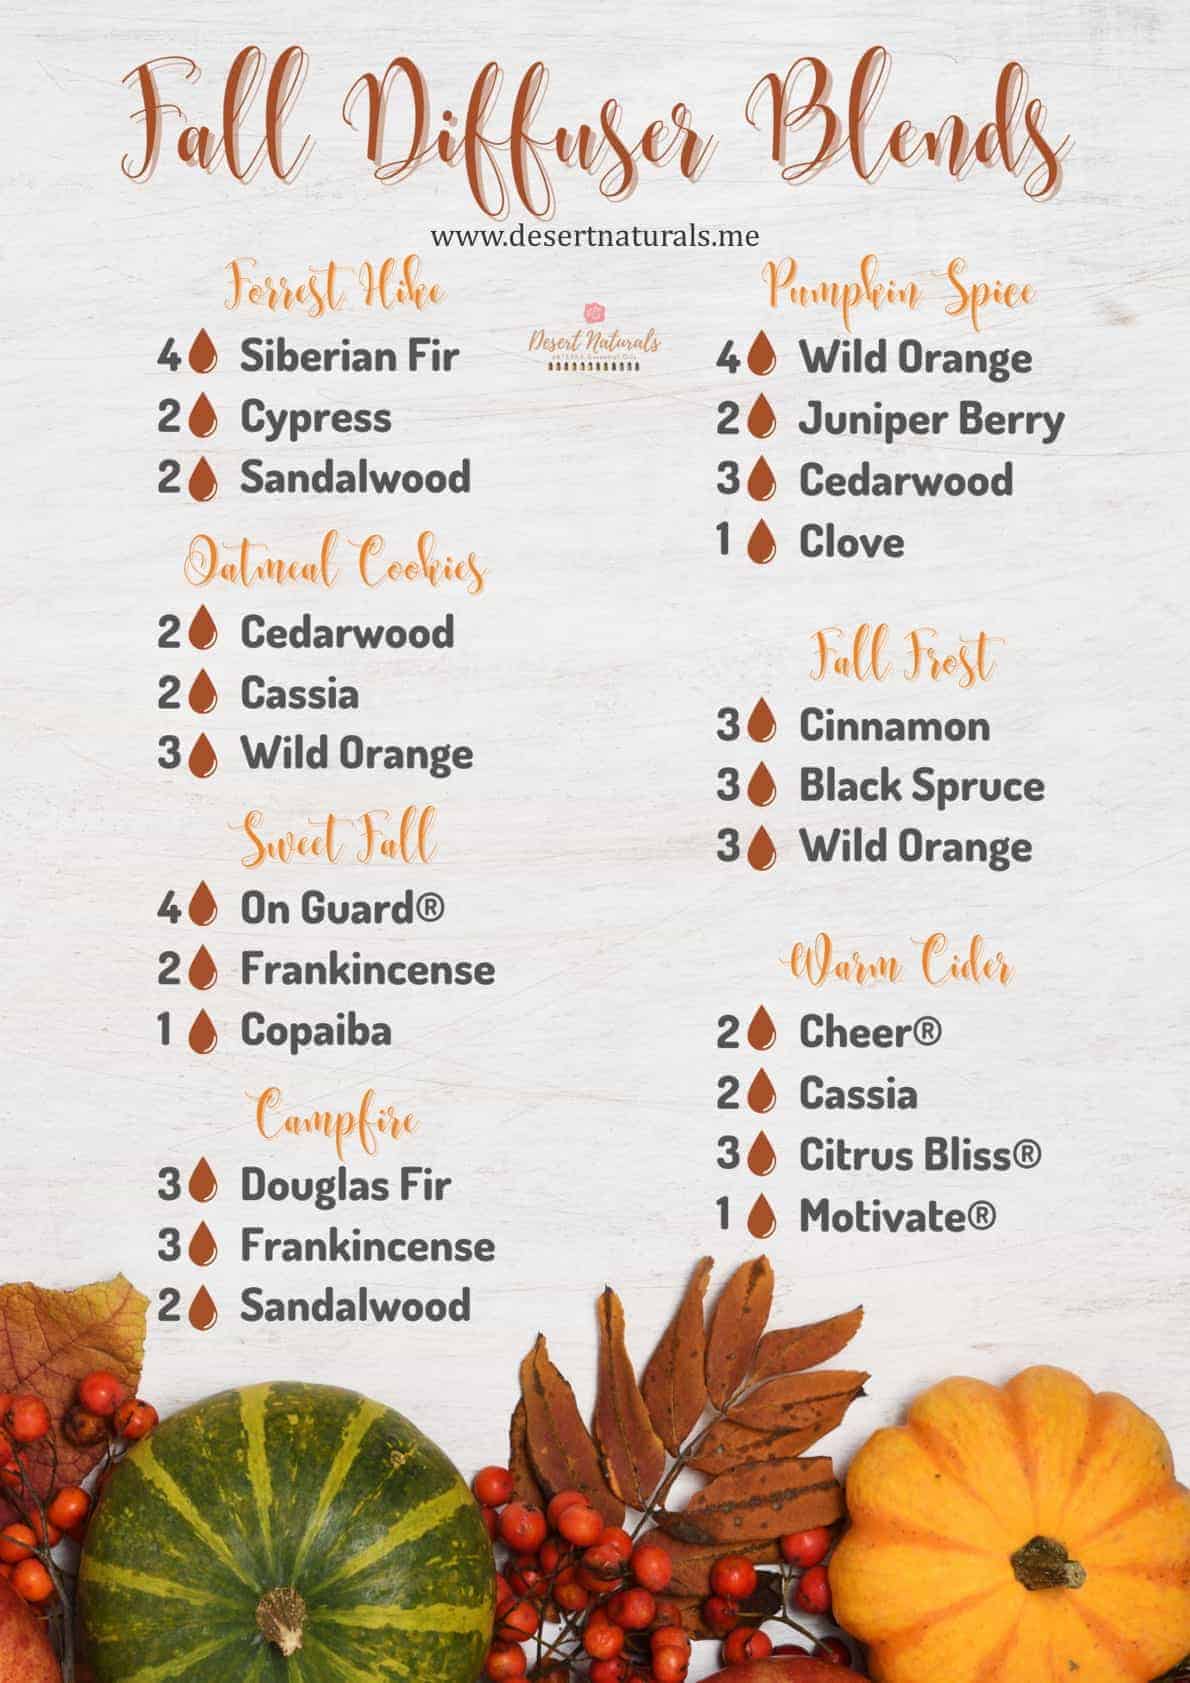 Essential Oil Fall Diffuser Blends for pumpkin spice, oatmeal cookies and more